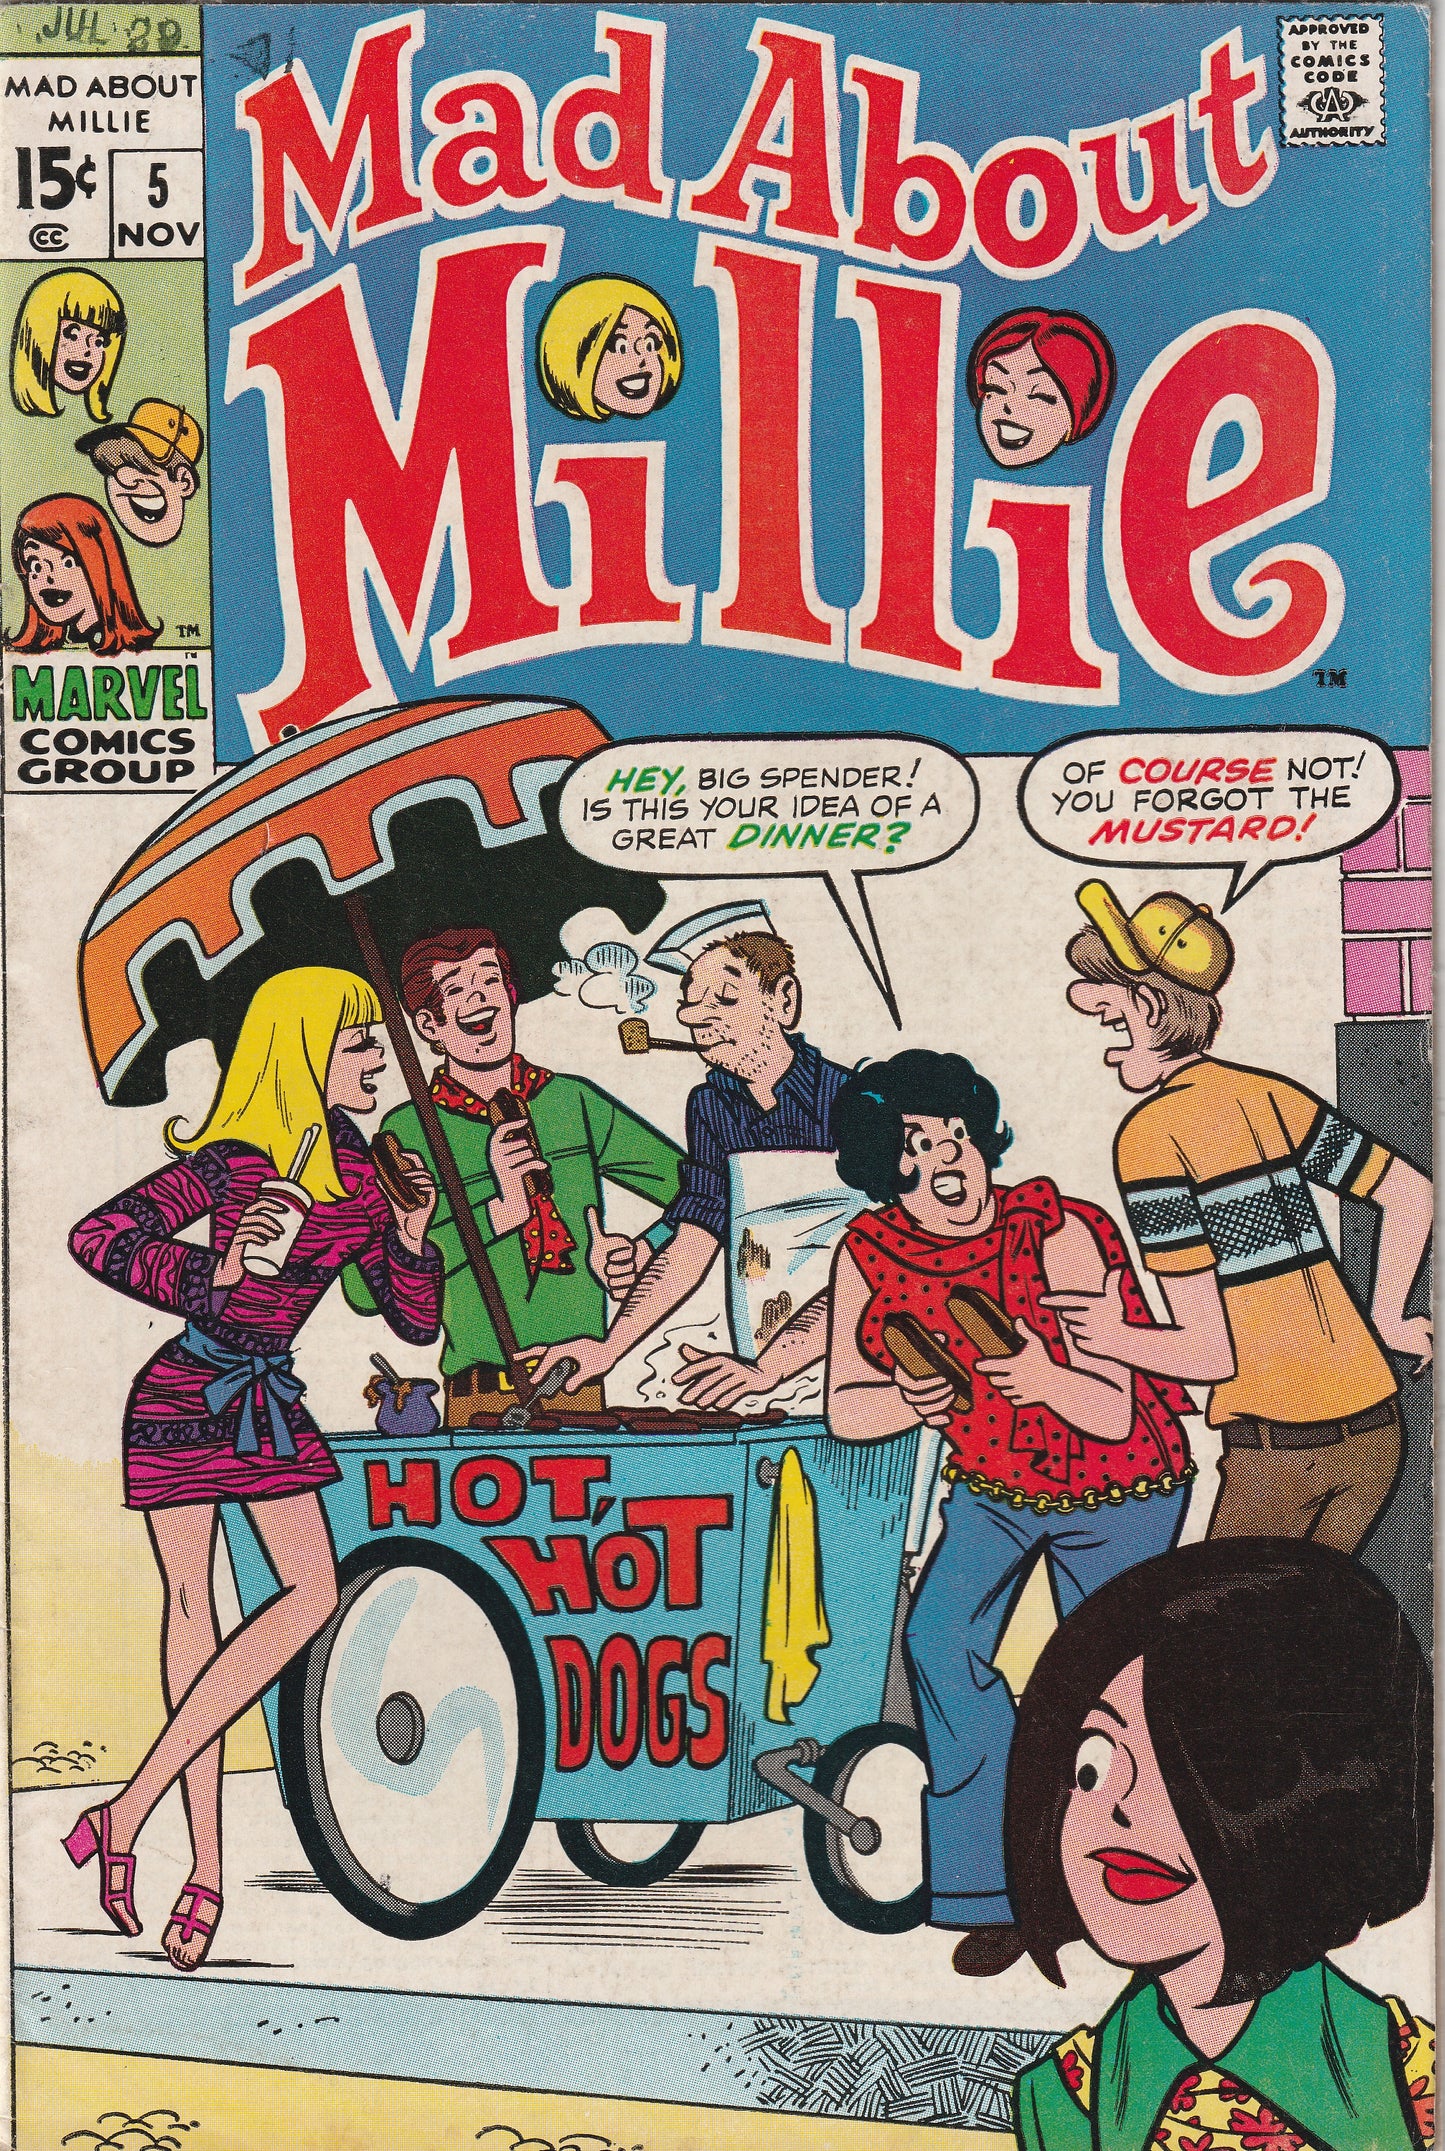 Mad About Millie #5 (1969)